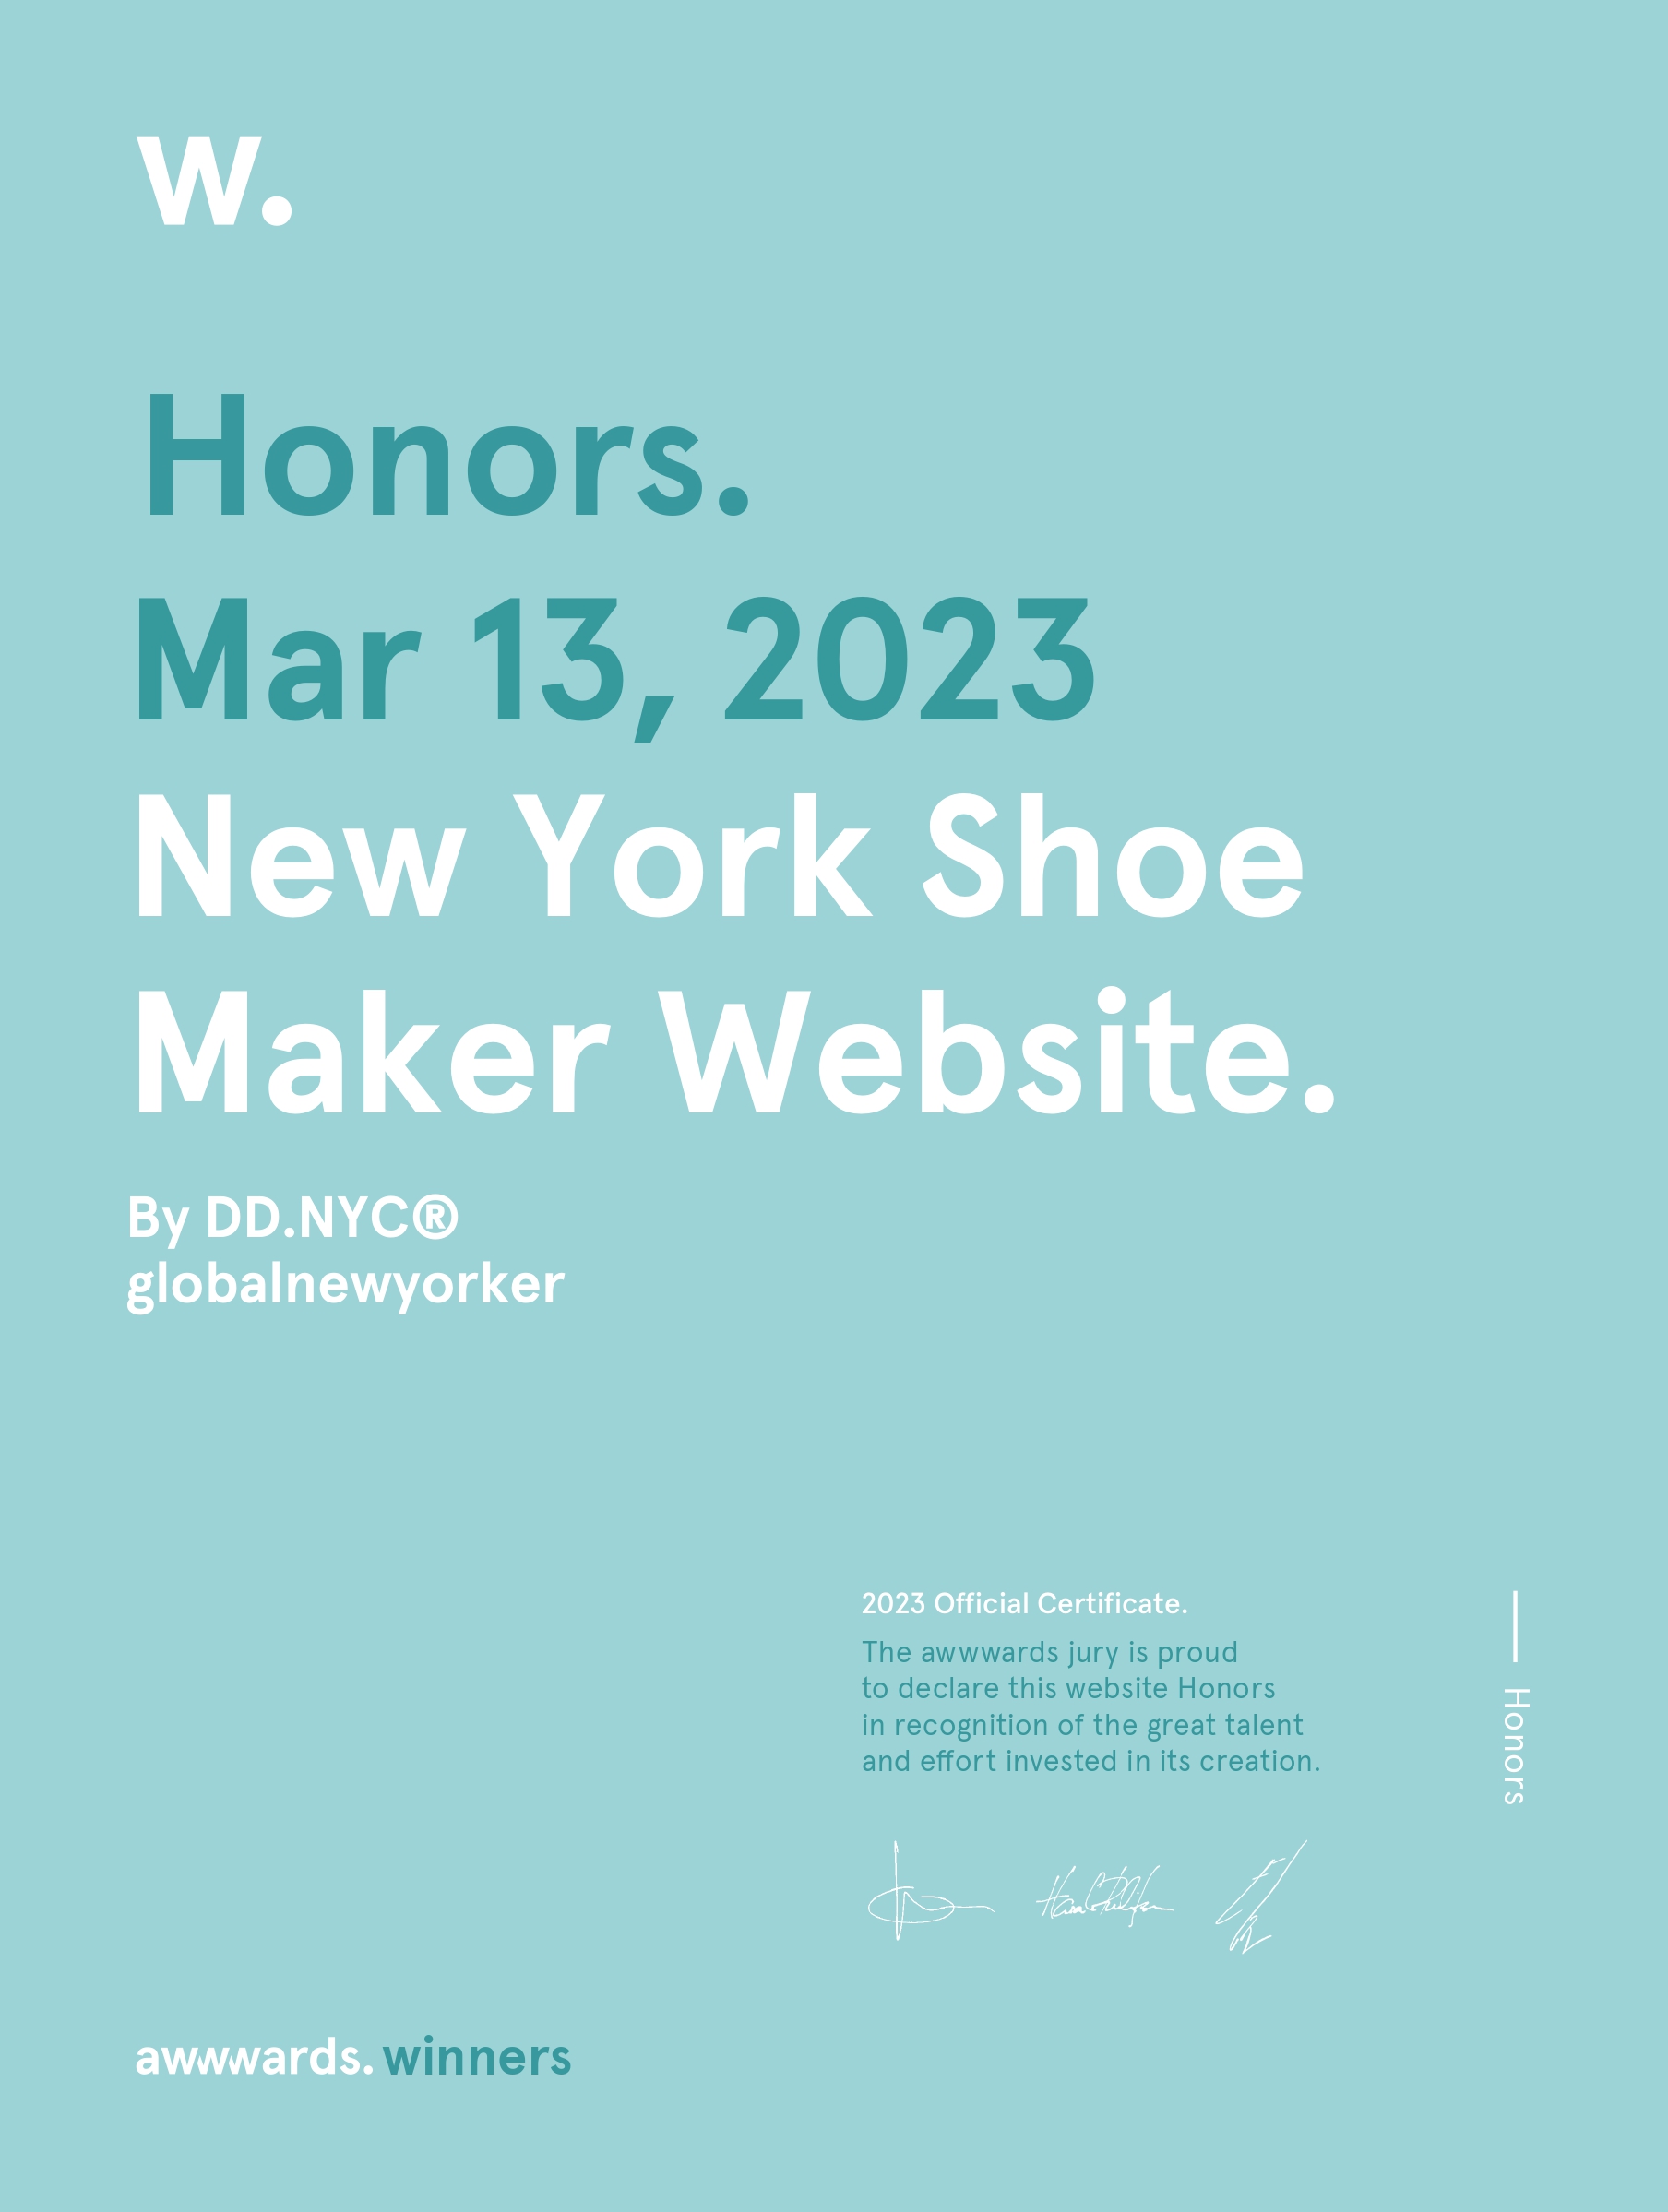 DD.NYC website design for Express Shoe Repair NYC awards